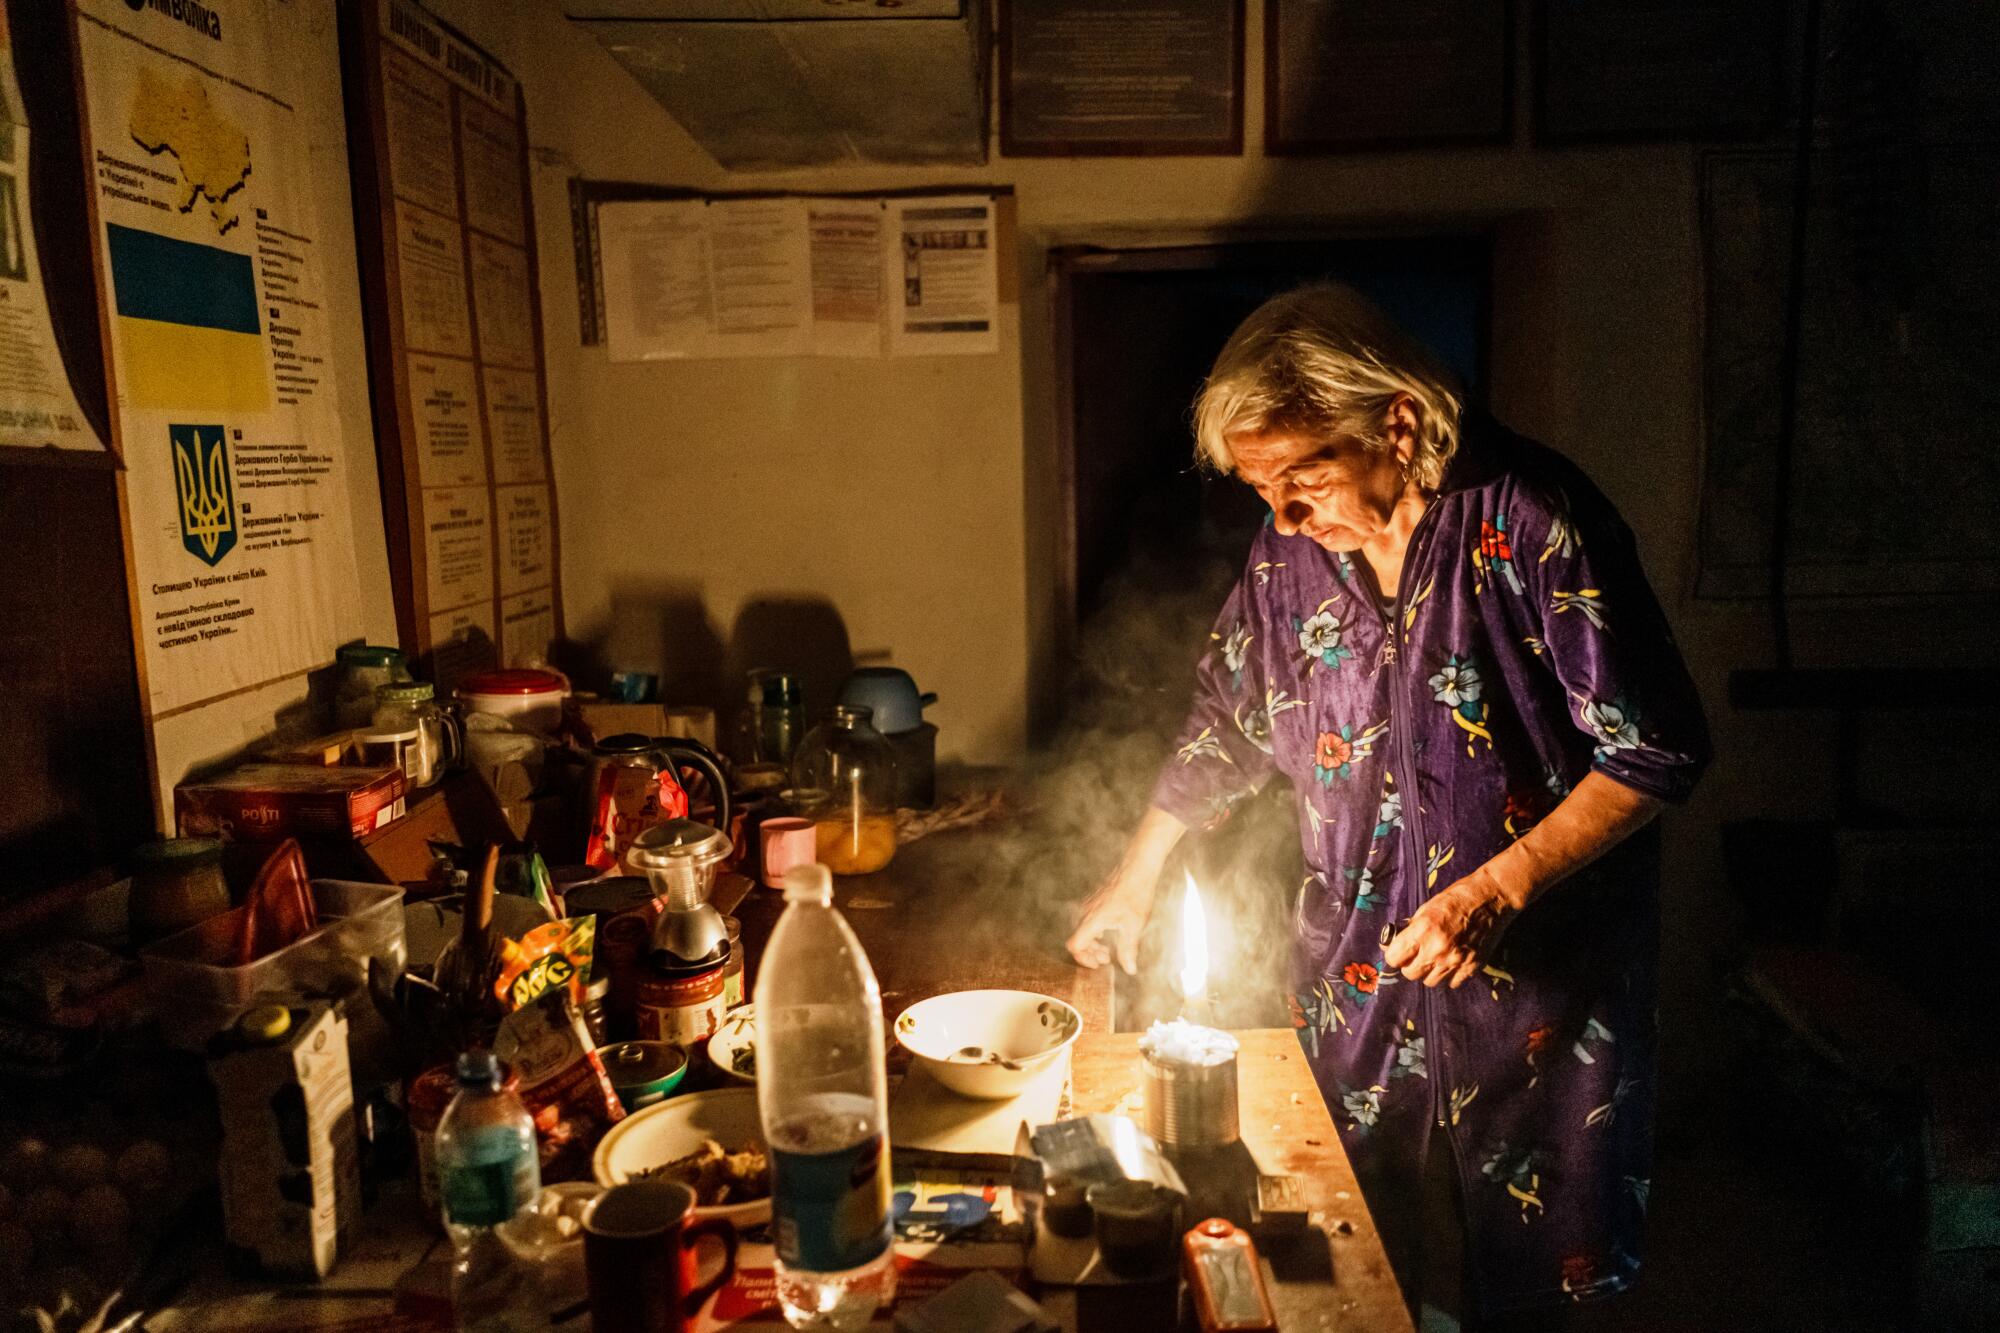 Nadia Schamal tries to put out and save her candles in a shelter near Velyka Novosilka, Ukraine